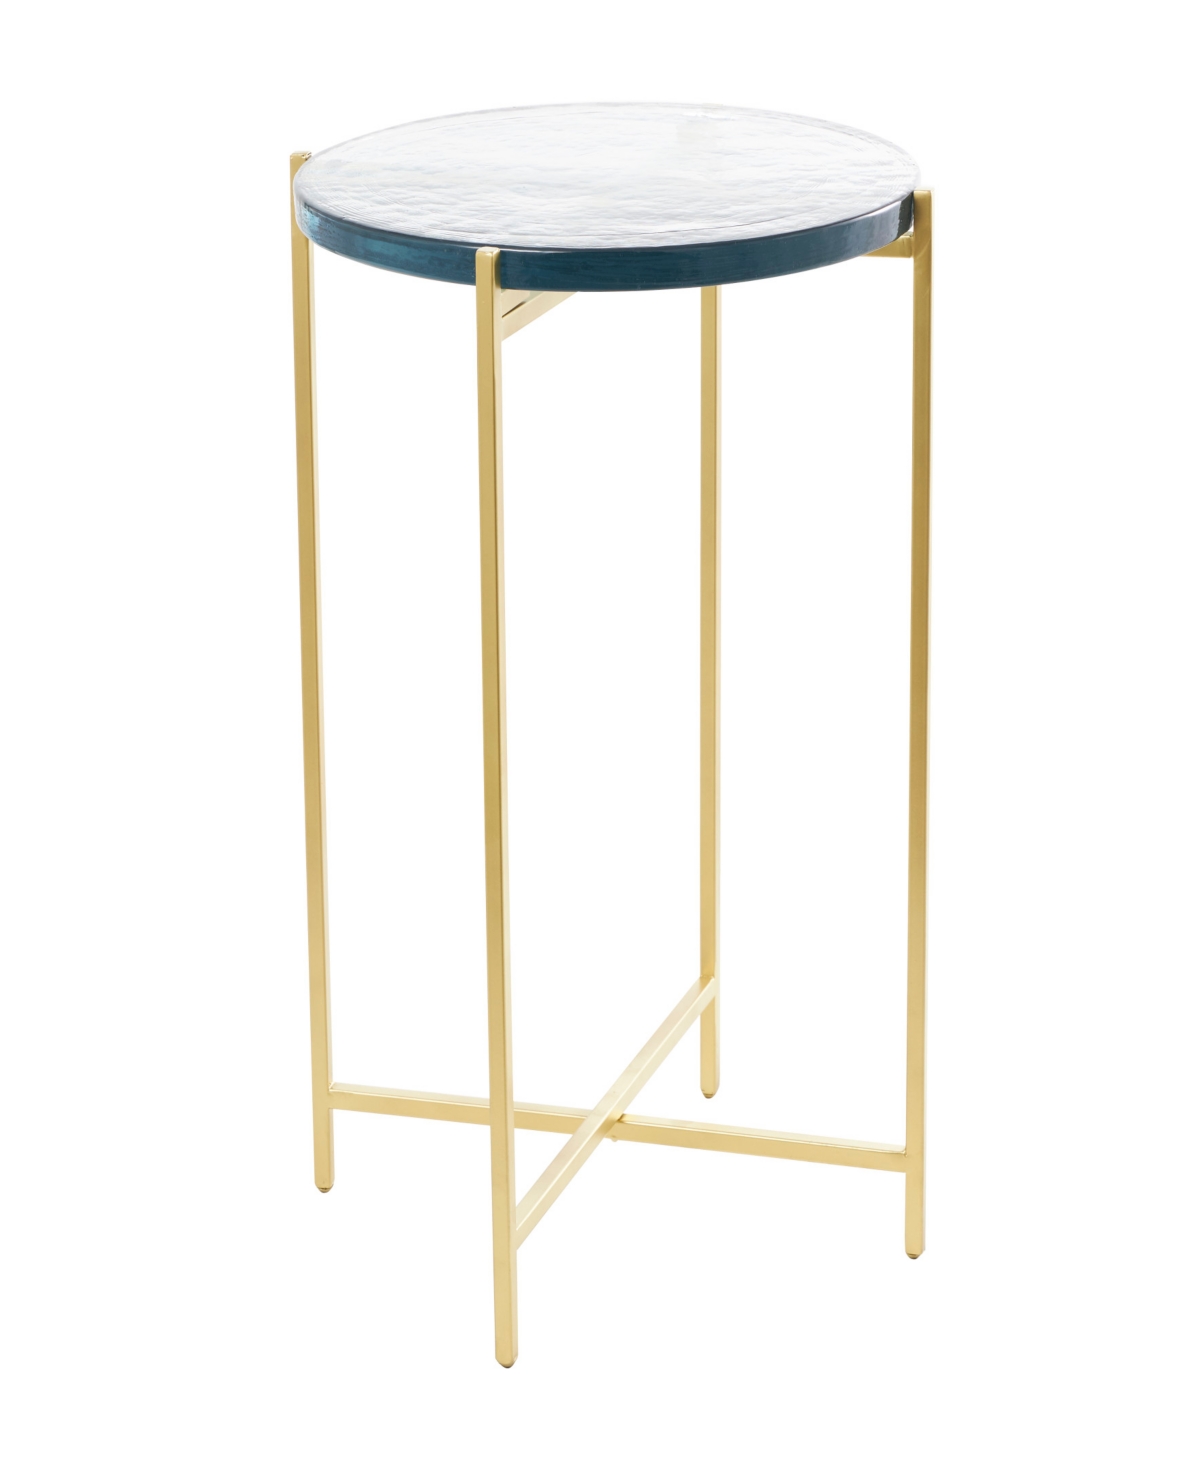 Rosemary Lane Metal With Textured Glass Tabletop X Shaped Accent Table Collection In Gold